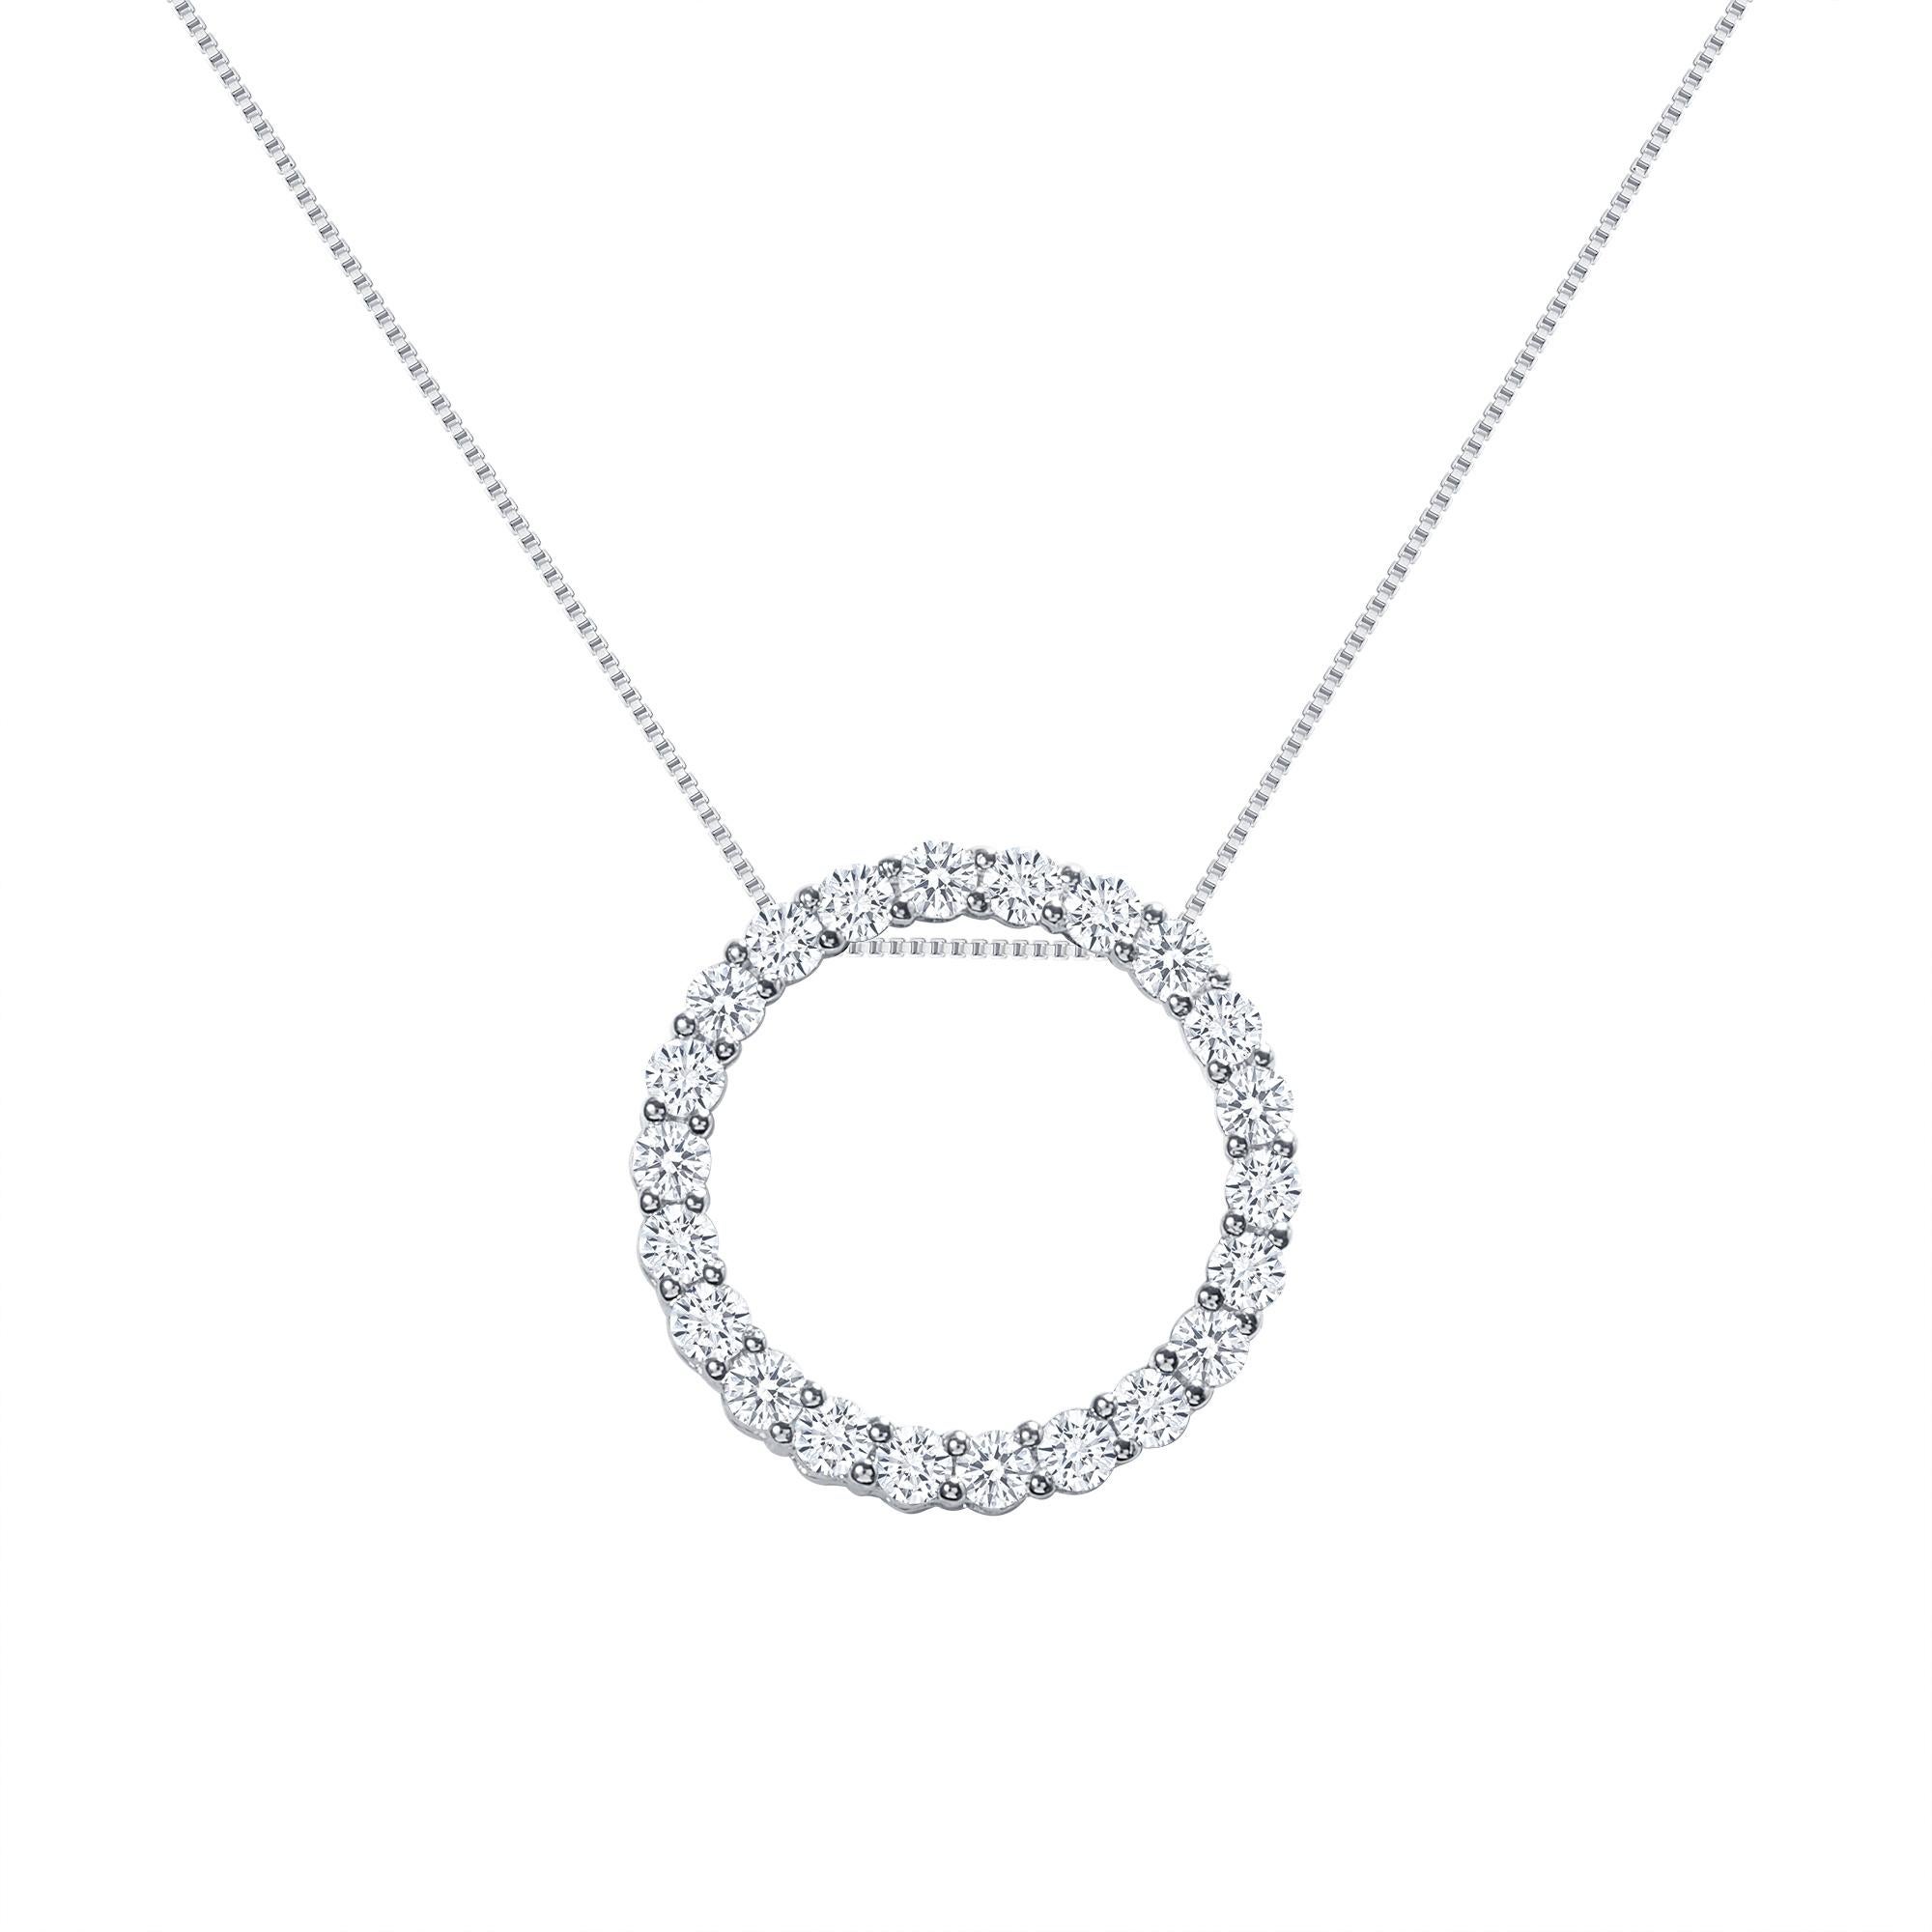 This diamond circle pendant provides a glowing chic look.
Metal: 14k Gold
Diamond Total Carats: 1 carat
Diamond Cut: Round Natural Diamonds (Not Lab Grown)
Diamond Clarity: VS
Diamond Color: F-G
Color: White Gold
Necklace Length: 14 inches